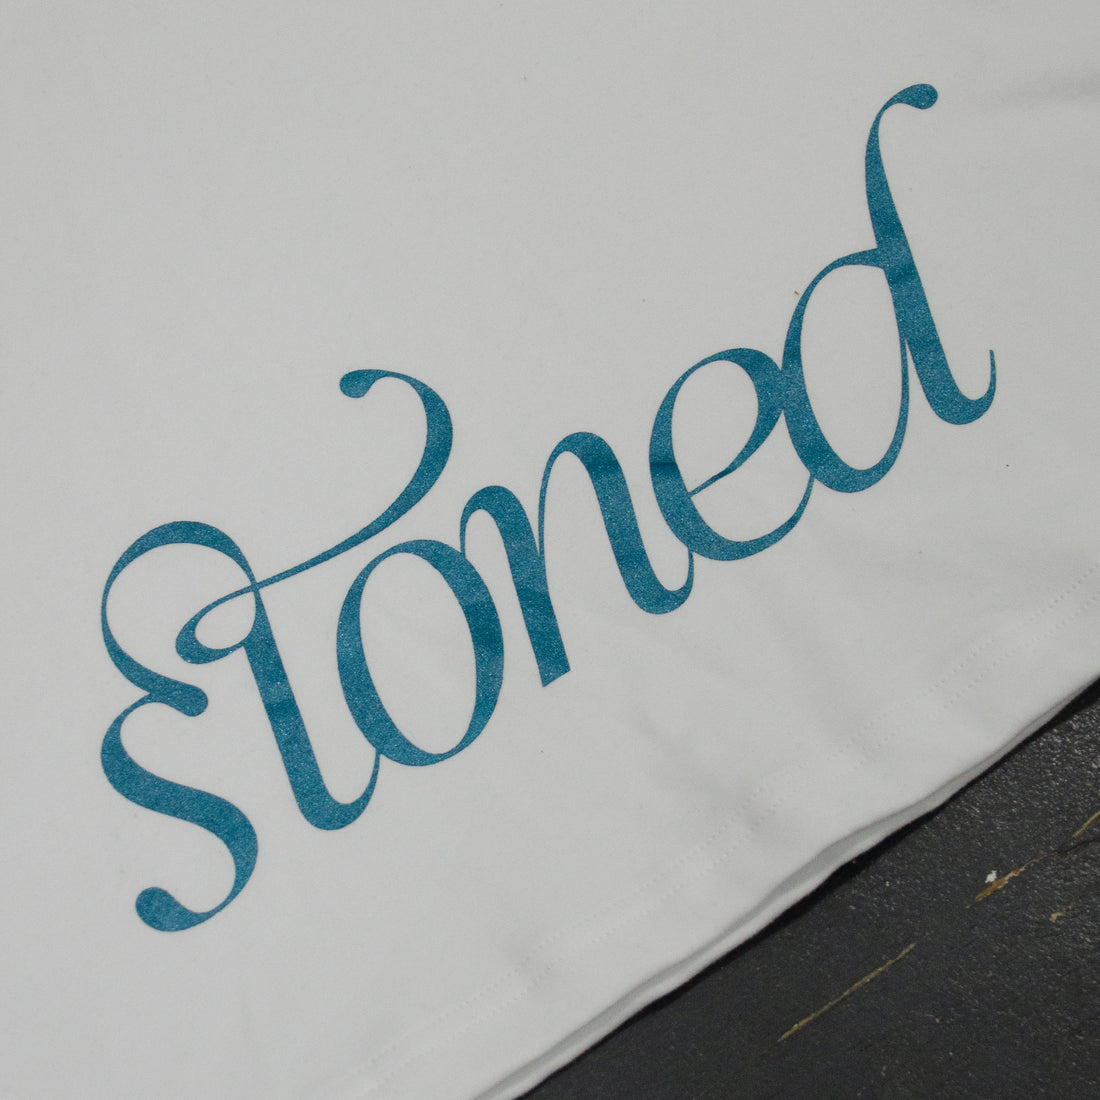 Stoned | Blessed Trilogy Tee White